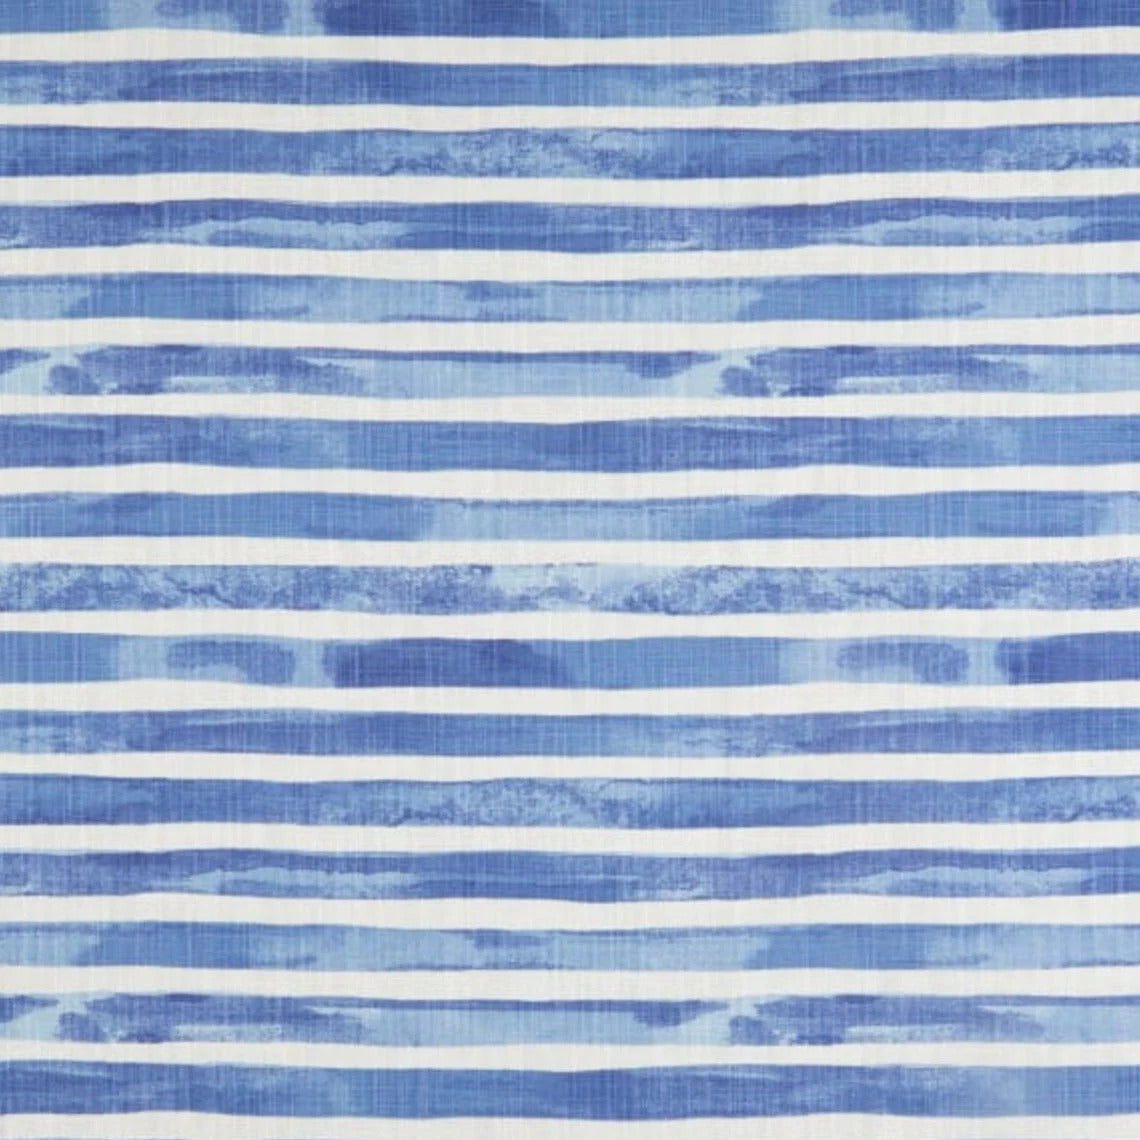 rod pocket curtains in nelson commodore blue horizontal watercolor stripe